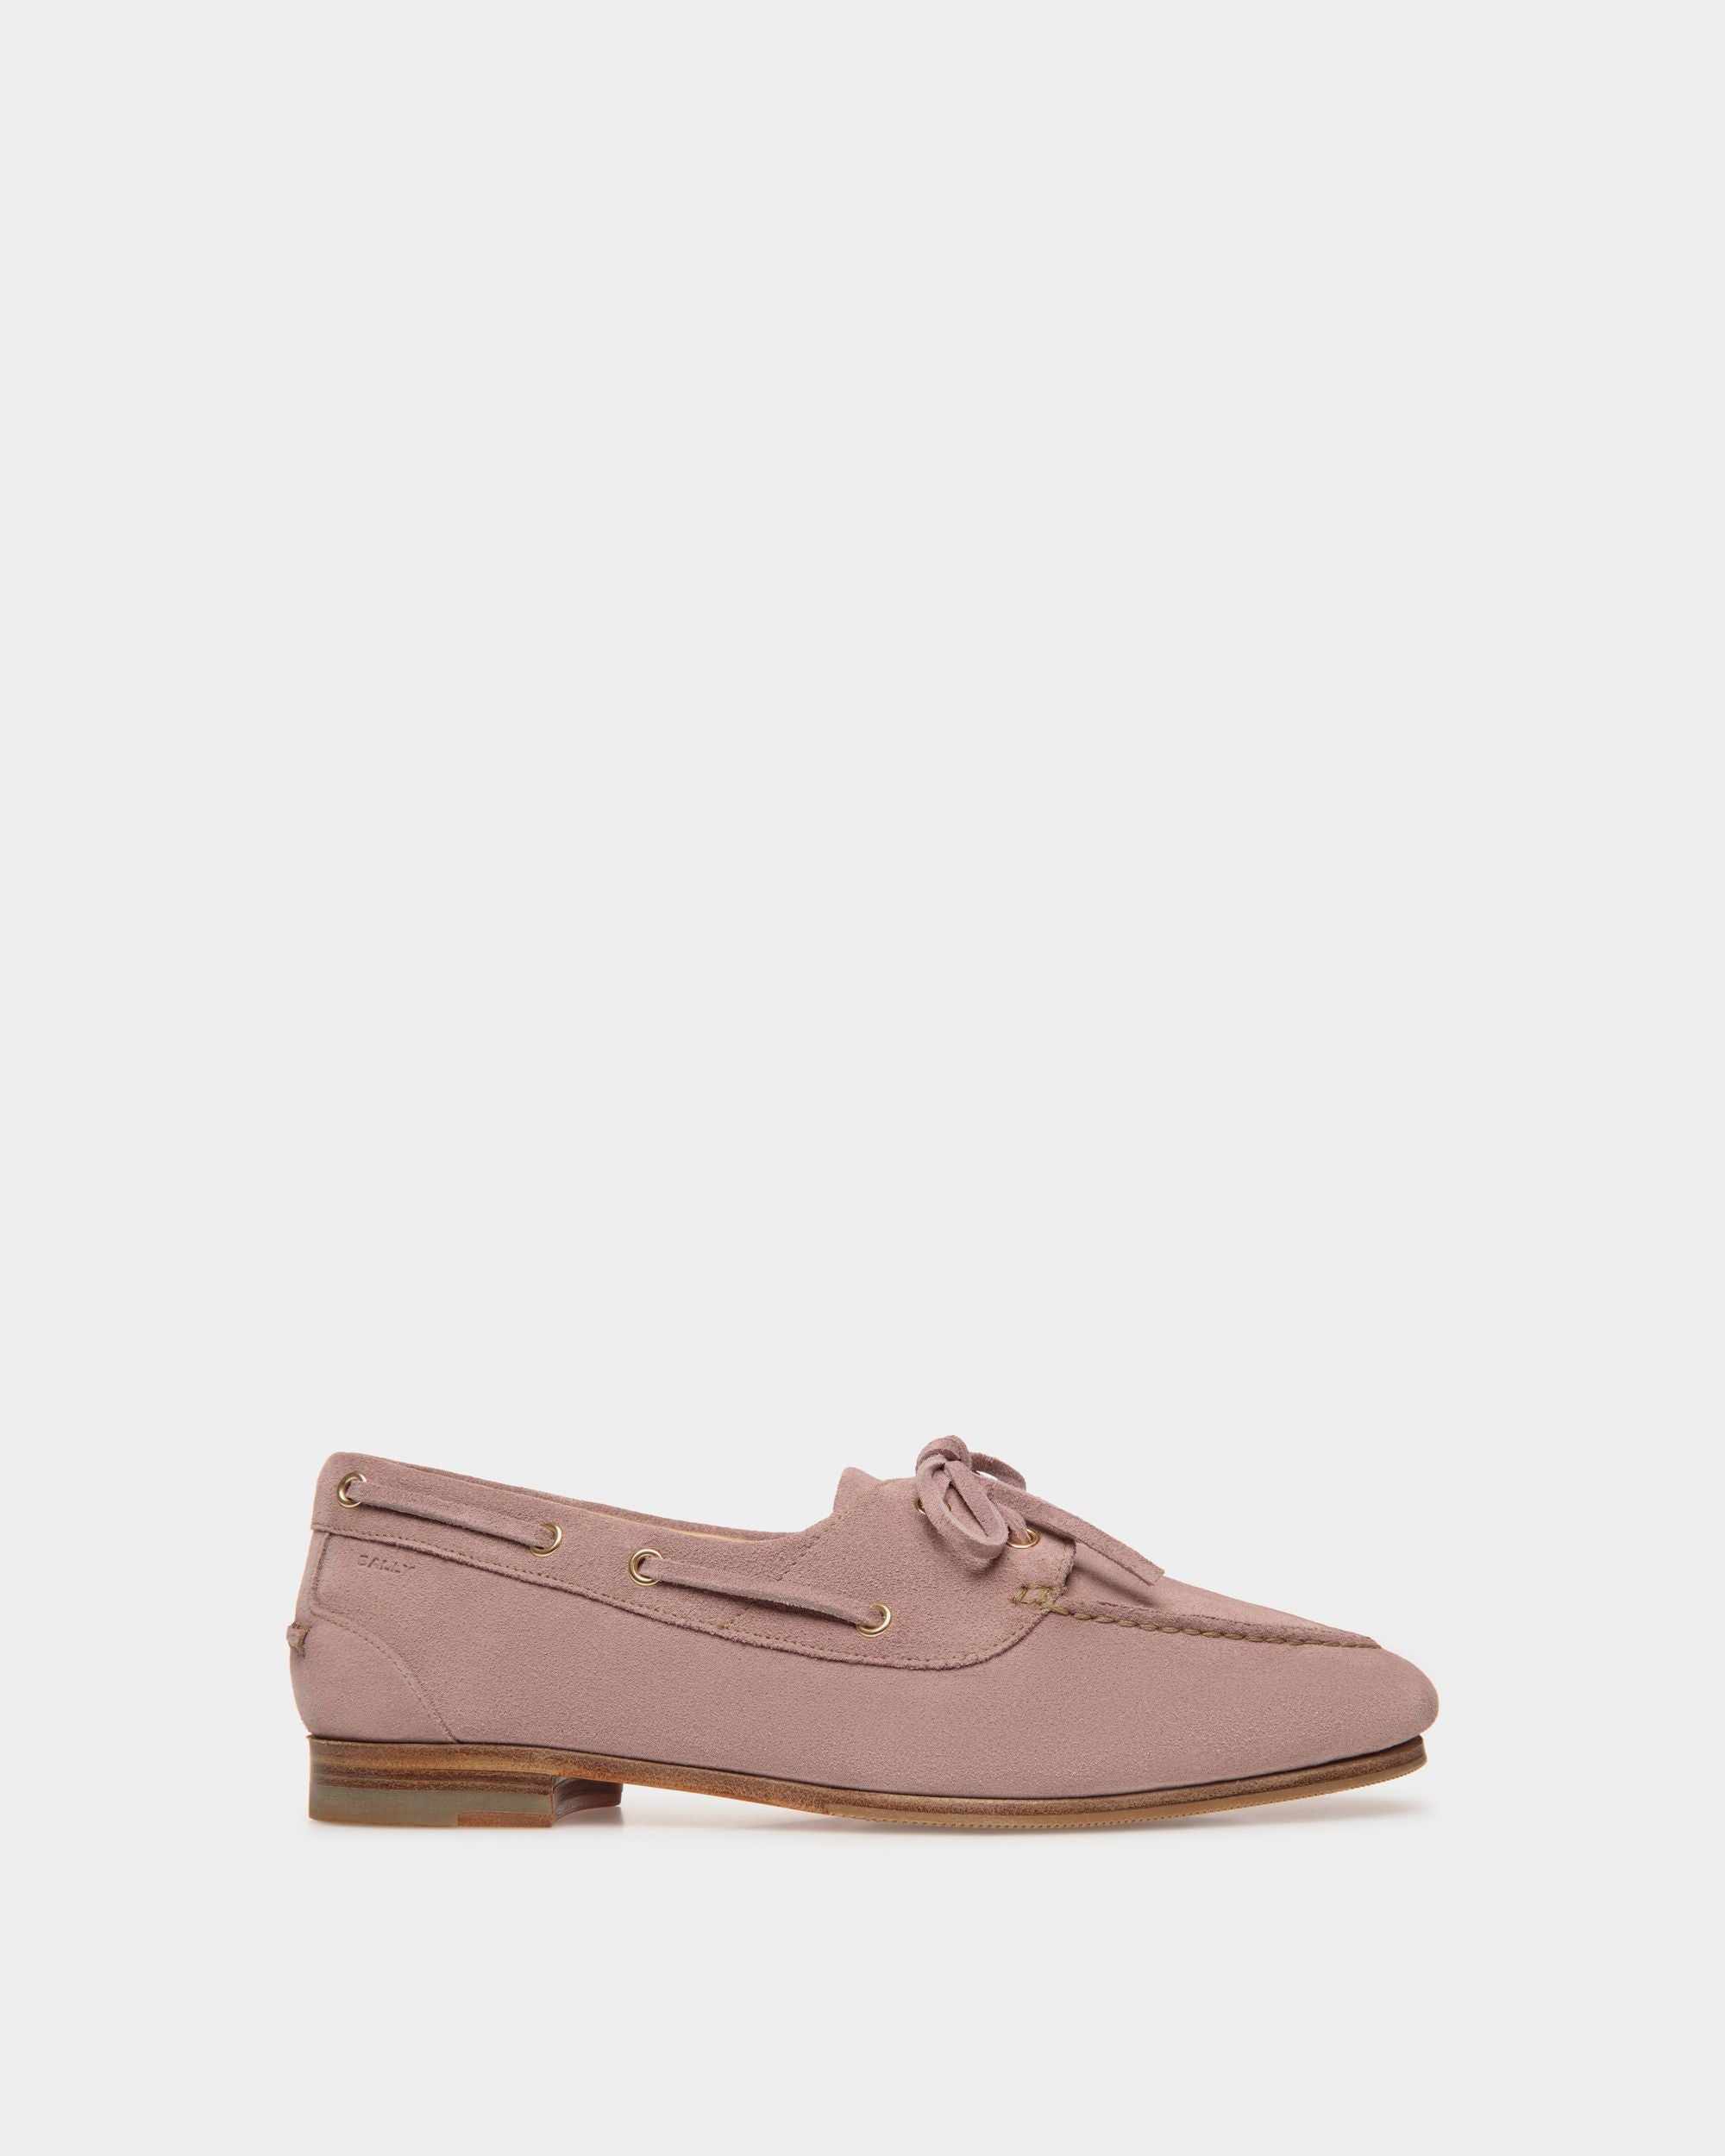 Plume | Women's Moccasin in Light Mauve Suede | Bally | Still Life Side